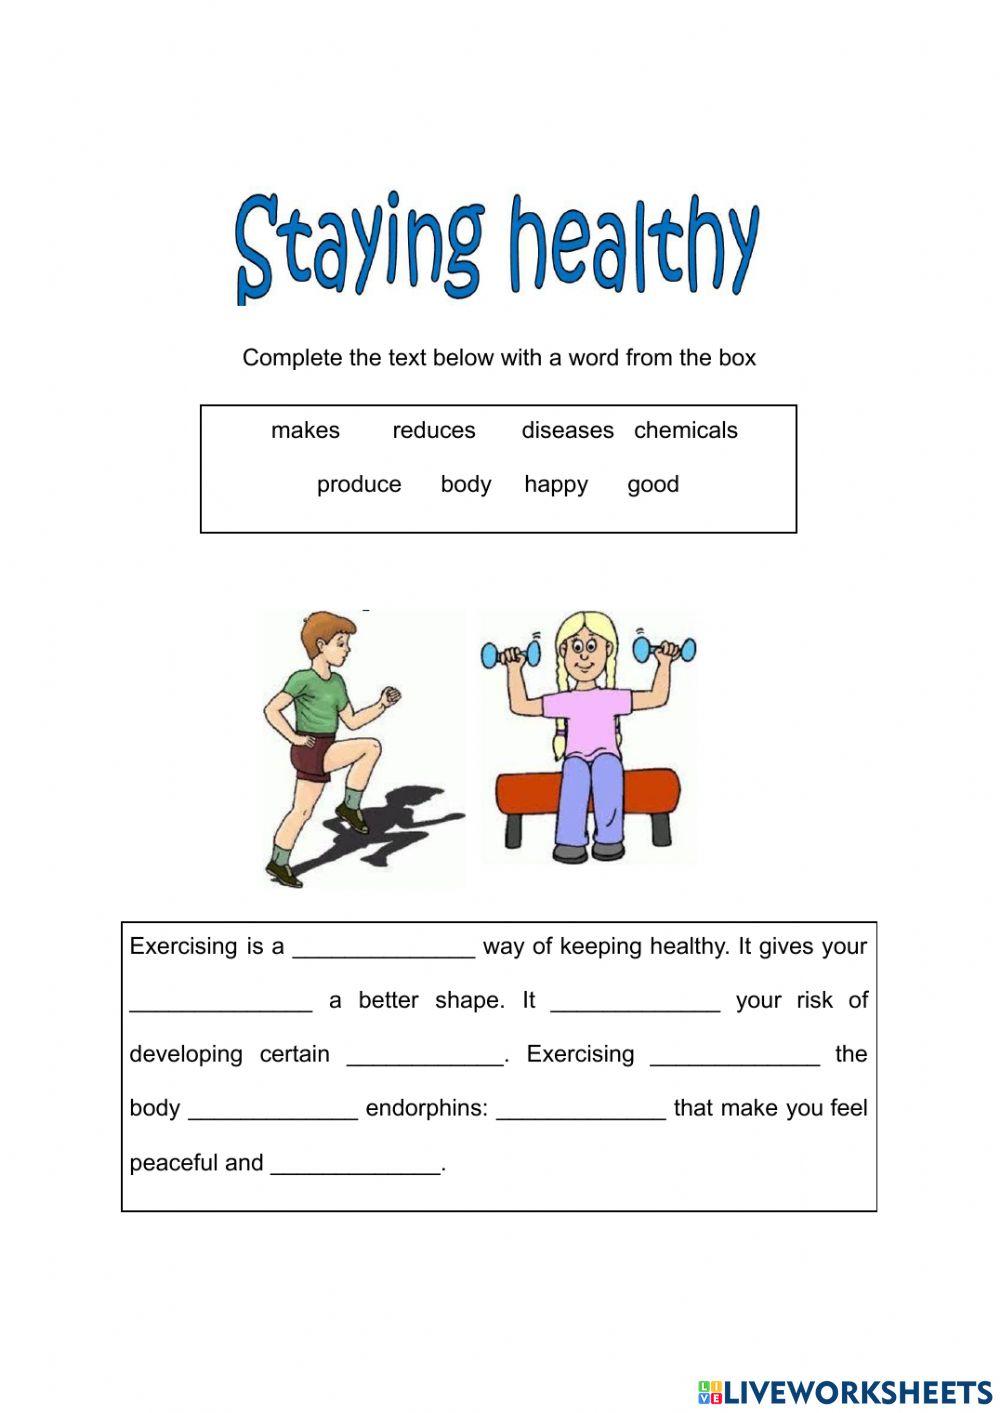 Staying healthy 01